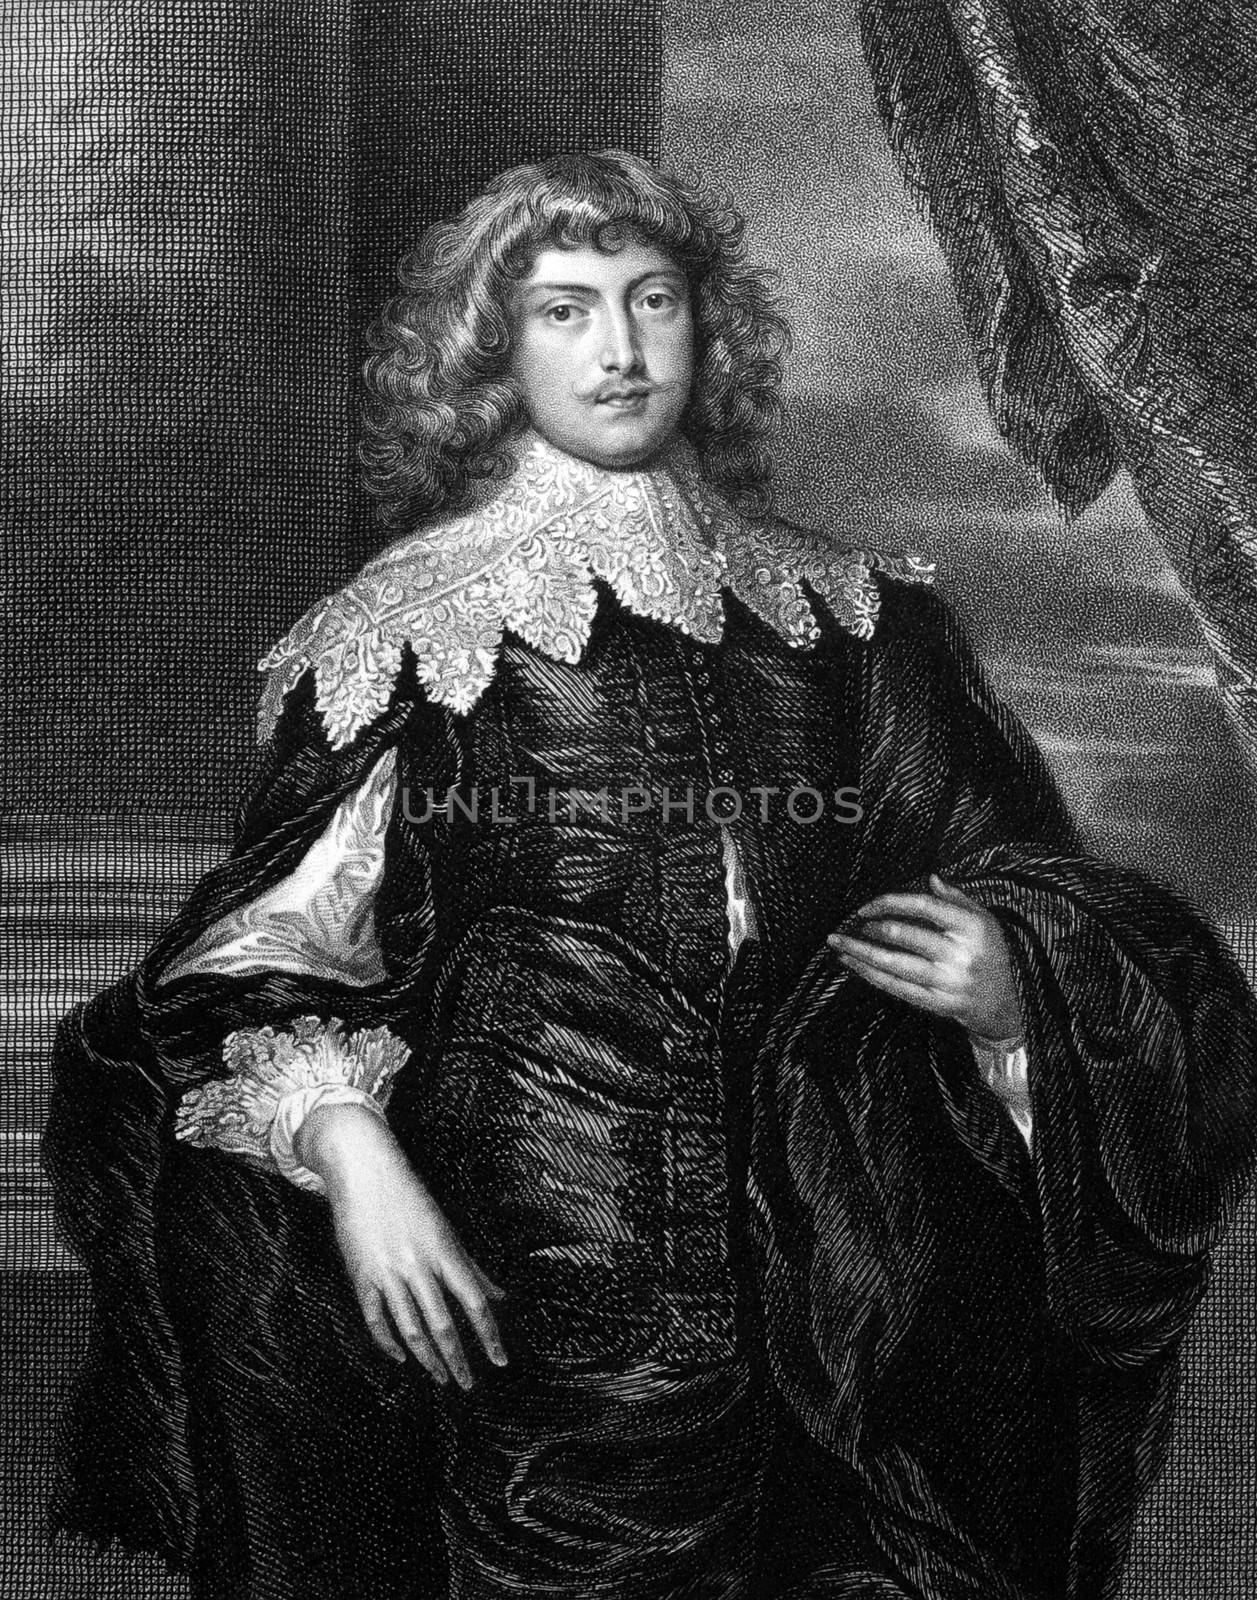 George Digby, 2nd Earl of Bristol (1612-1677) on engraving from 1830.  English politician. Engraved by T.Wright and published in ''Portraits of Illustrious Personages of Great Britain'',UK,1830.
